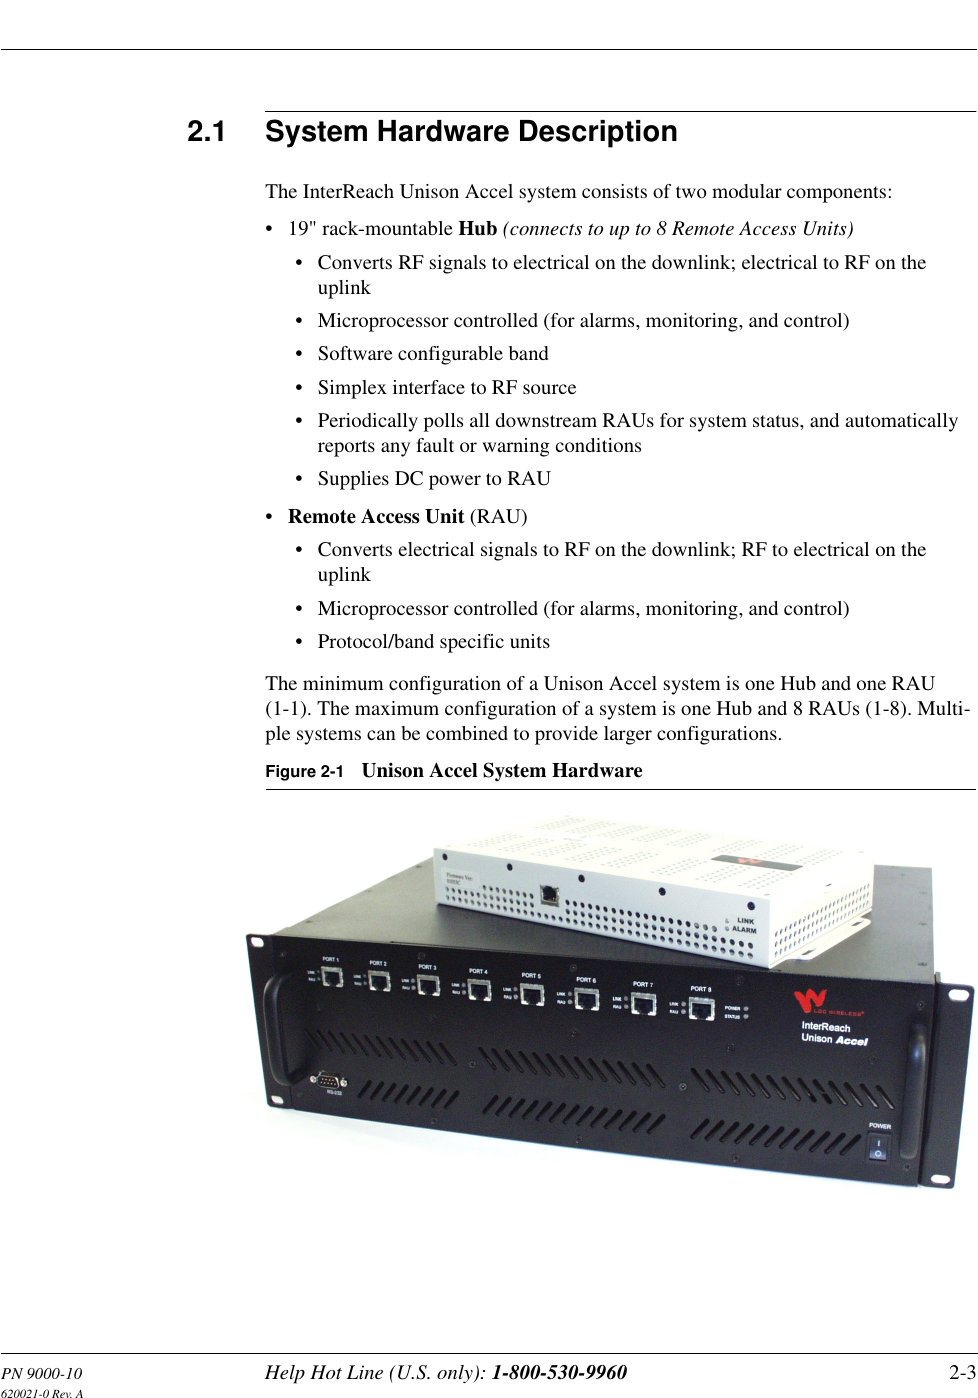 PN 9000-10 Help Hot Line (U.S. only): 1-800-530-9960 2-3620021-0 Rev. A2.1 System Hardware DescriptionThe InterReach Unison Accel system consists of two modular components:• 19&quot; rack-mountable Hub (connects to up to 8 Remote Access Units)• Converts RF signals to electrical on the downlink; electrical to RF on the uplink• Microprocessor controlled (for alarms, monitoring, and control)• Software configurable band• Simplex interface to RF source• Periodically polls all downstream RAUs for system status, and automatically reports any fault or warning conditions• Supplies DC power to RAU•Remote Access Unit (RAU)• Converts electrical signals to RF on the downlink; RF to electrical on the uplink• Microprocessor controlled (for alarms, monitoring, and control)• Protocol/band specific unitsThe minimum configuration of a Unison Accel system is one Hub and one RAU (1-1). The maximum configuration of a system is one Hub and 8 RAUs (1-8). Multi-ple systems can be combined to provide larger configurations.Figure 2-1 Unison Accel System Hardware